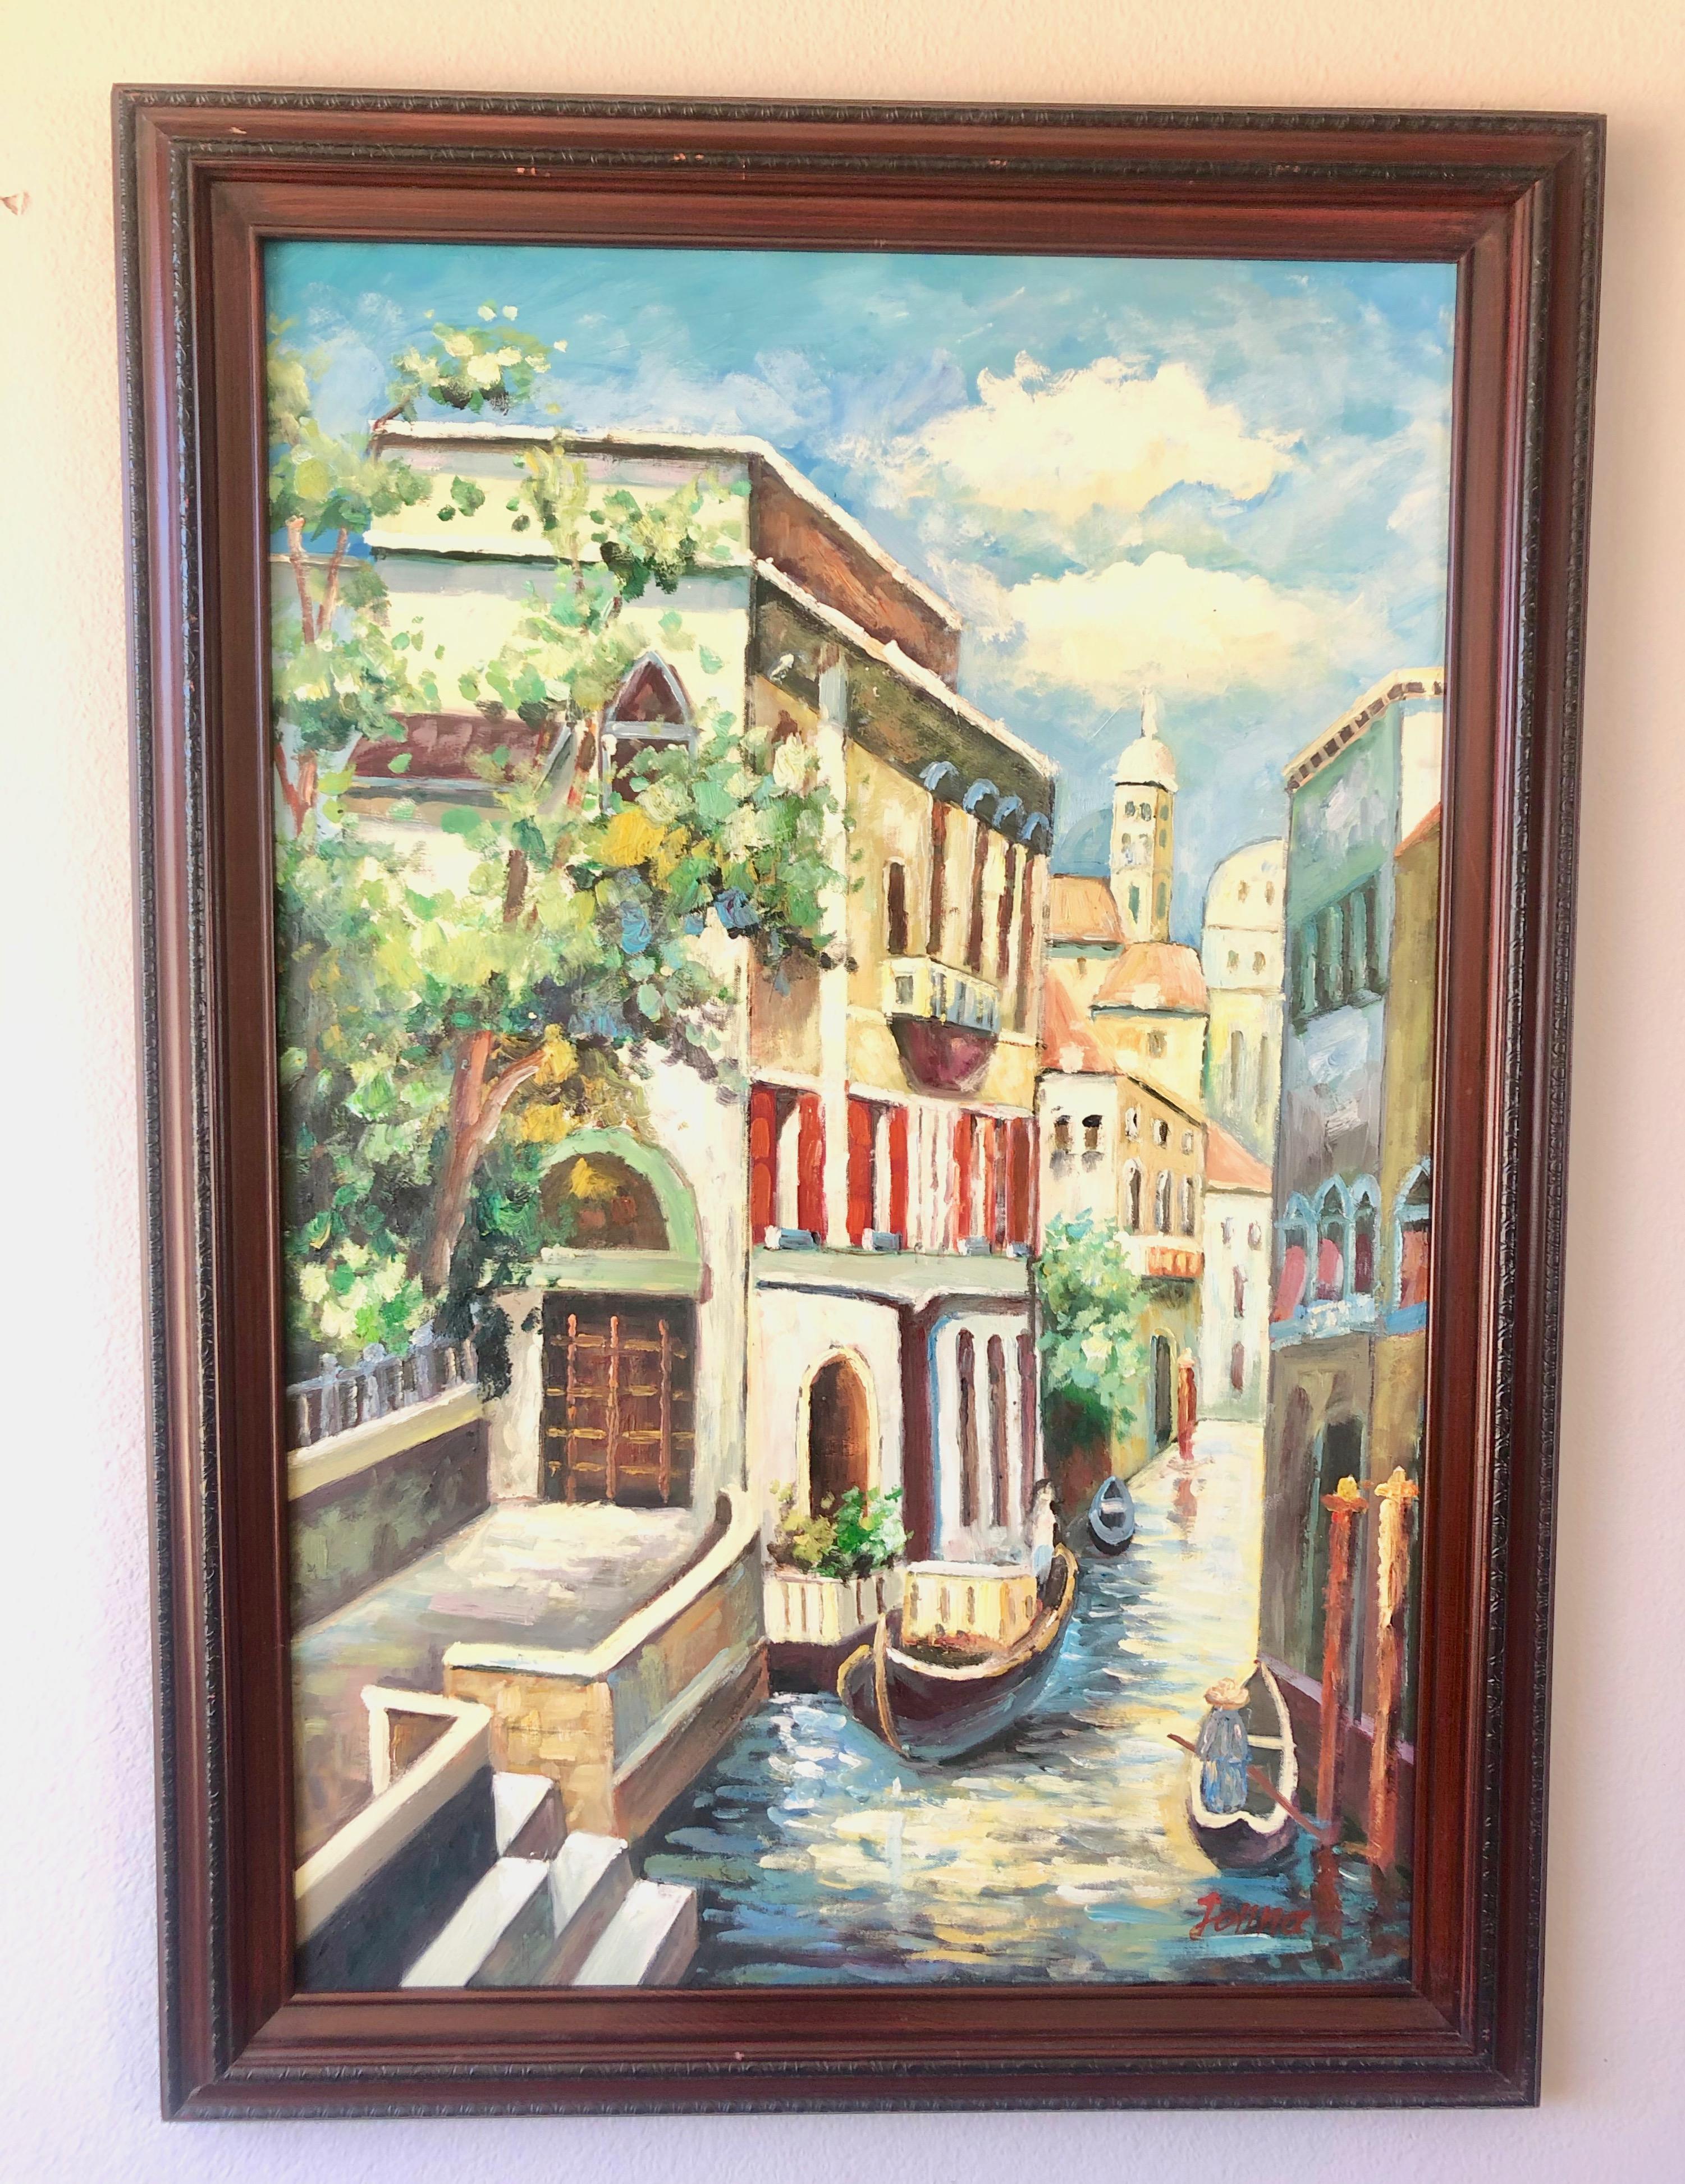 Canals of Venice painting believed to be painted by Jonna Tratner. This piece is signed.